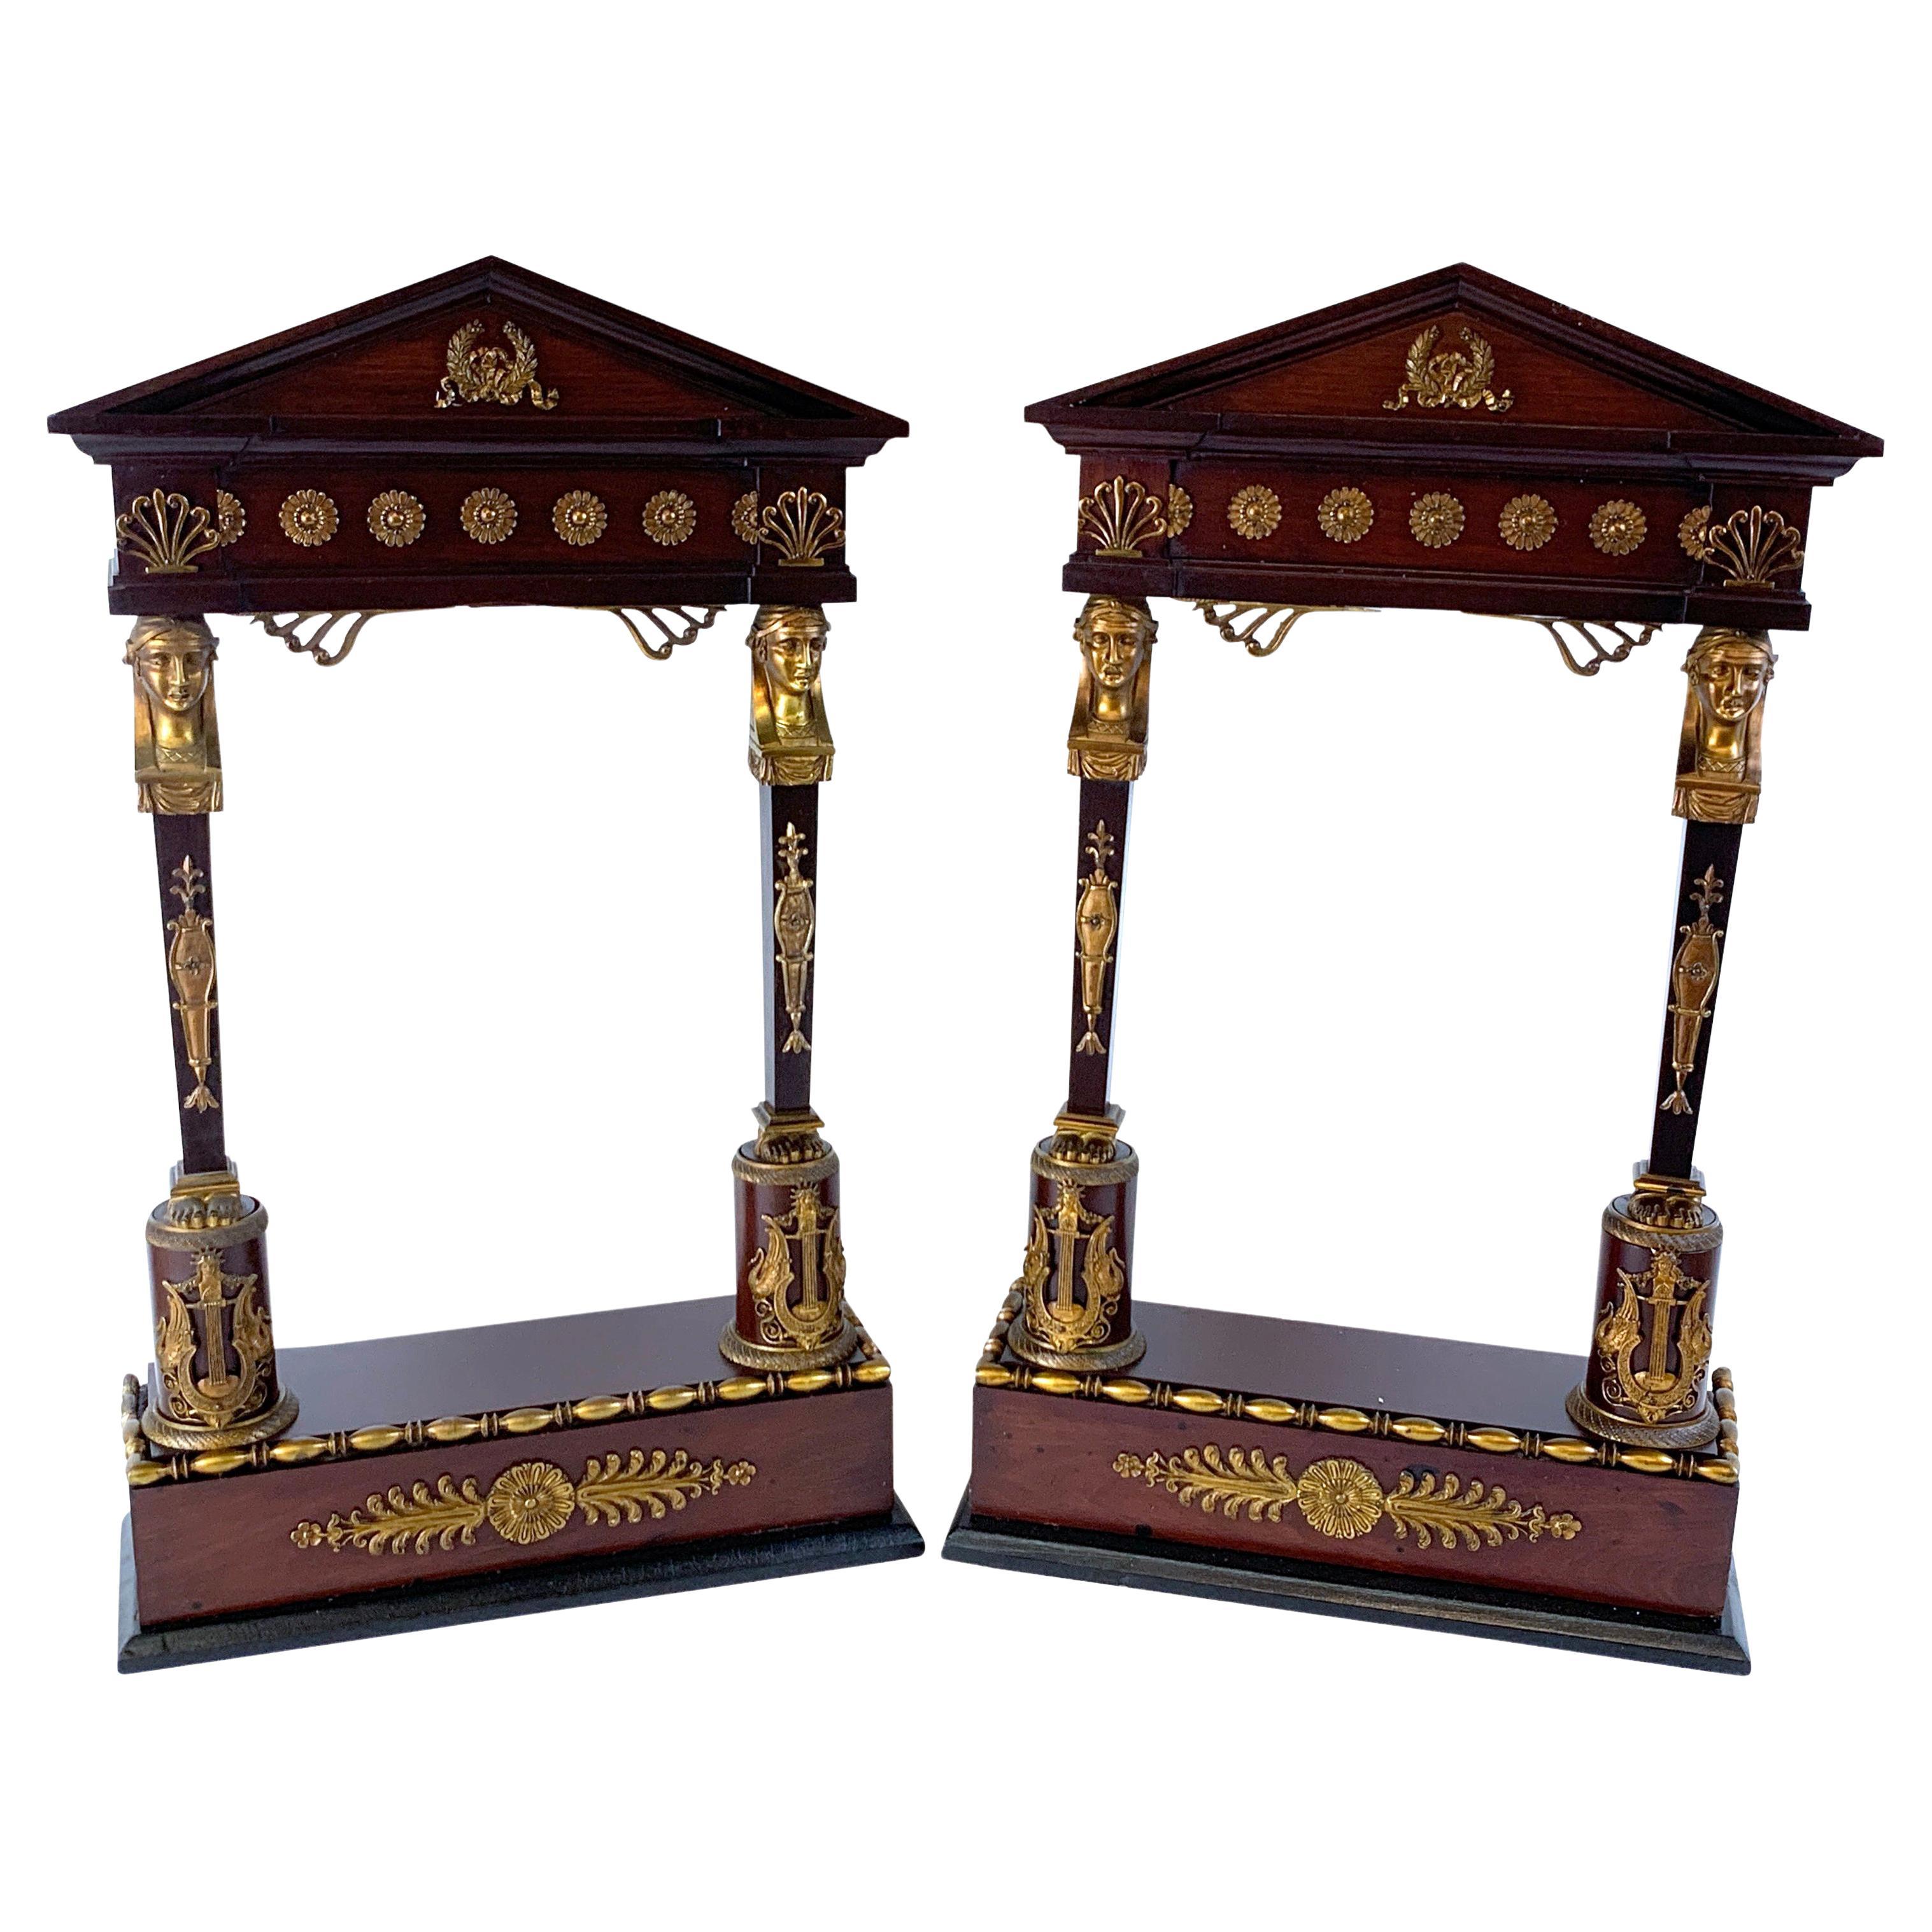 Pair of Second Empire Caryatid Wall Ormolu Mounted Wall Shelves For Sale